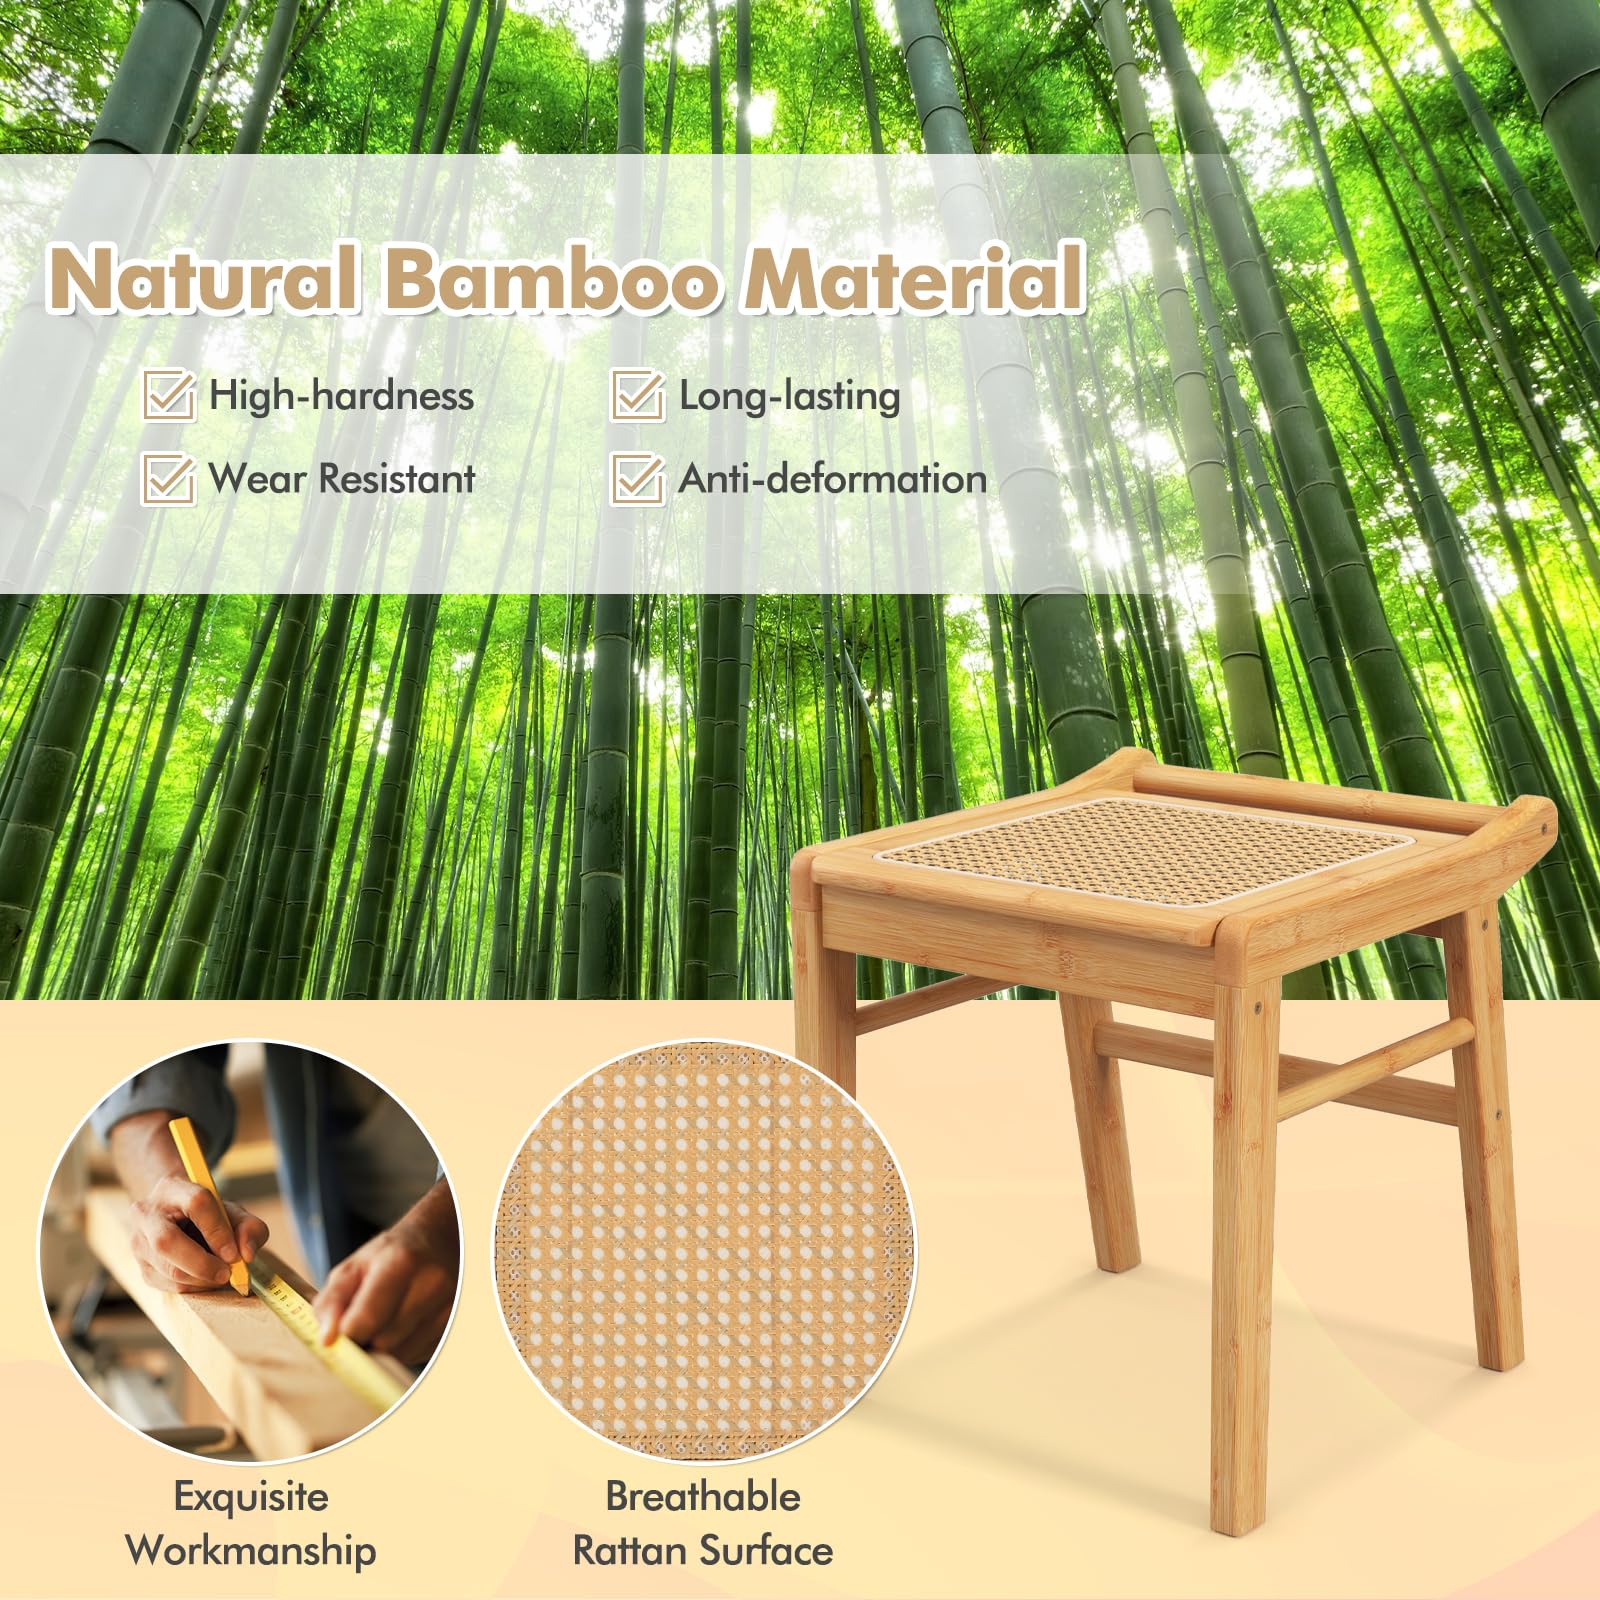 CHARMAID Vanity Stool, Bamboo Ottoman Foot Rest with Rattan Seat, Anti-Slip Foot Pads